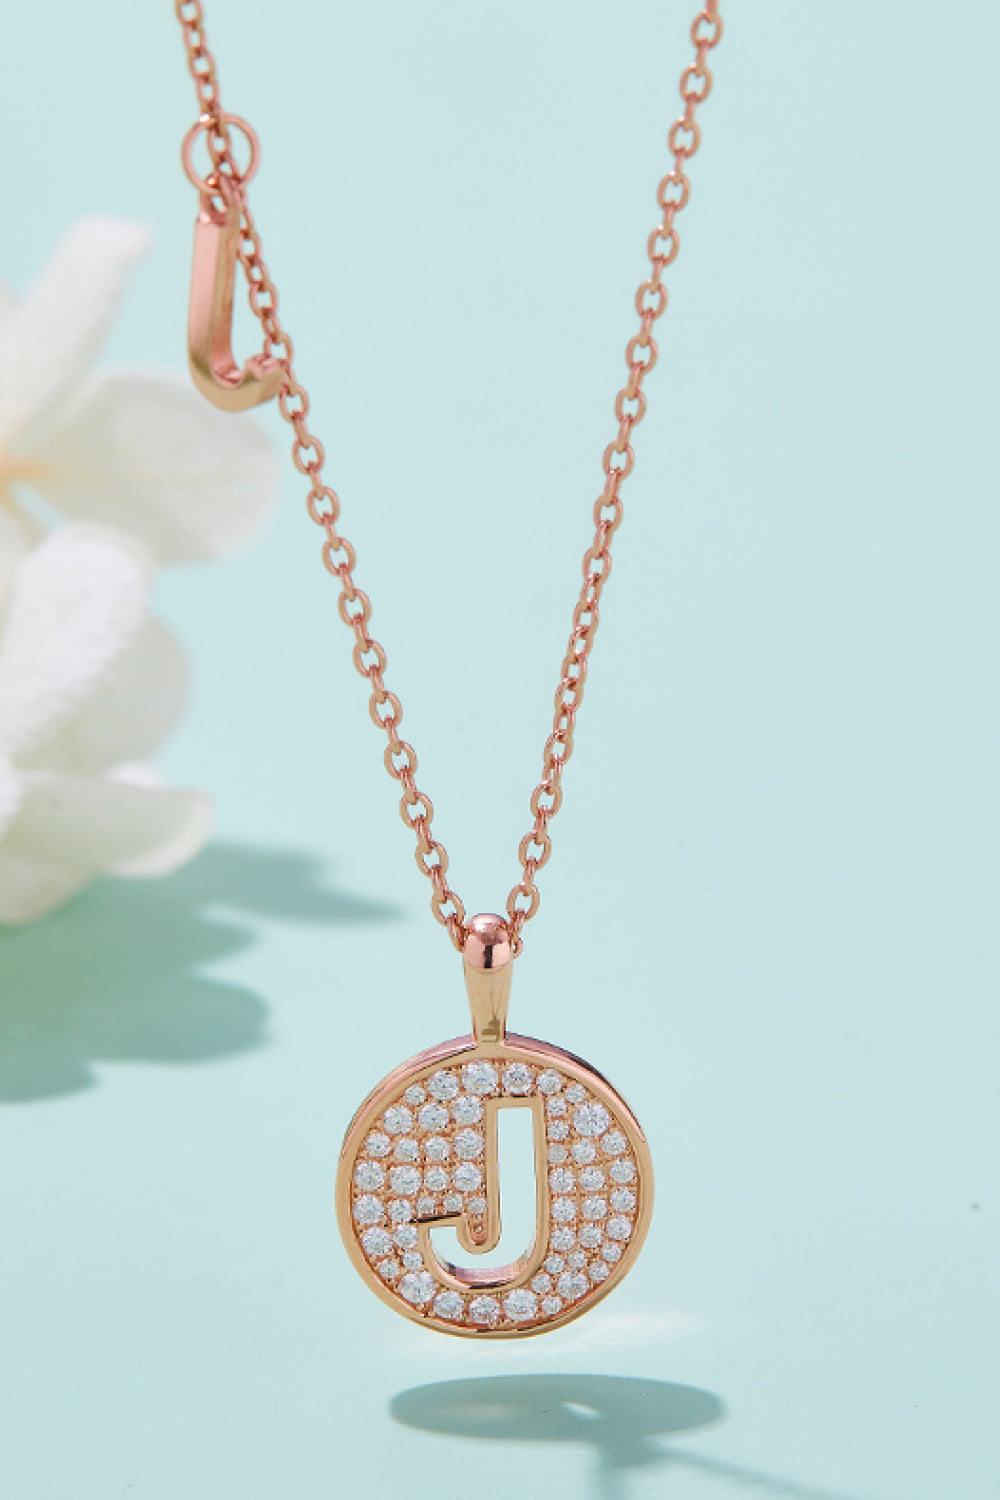 Moissanite A to J Pendant Necklace king-general-store-5710.myshopify.com